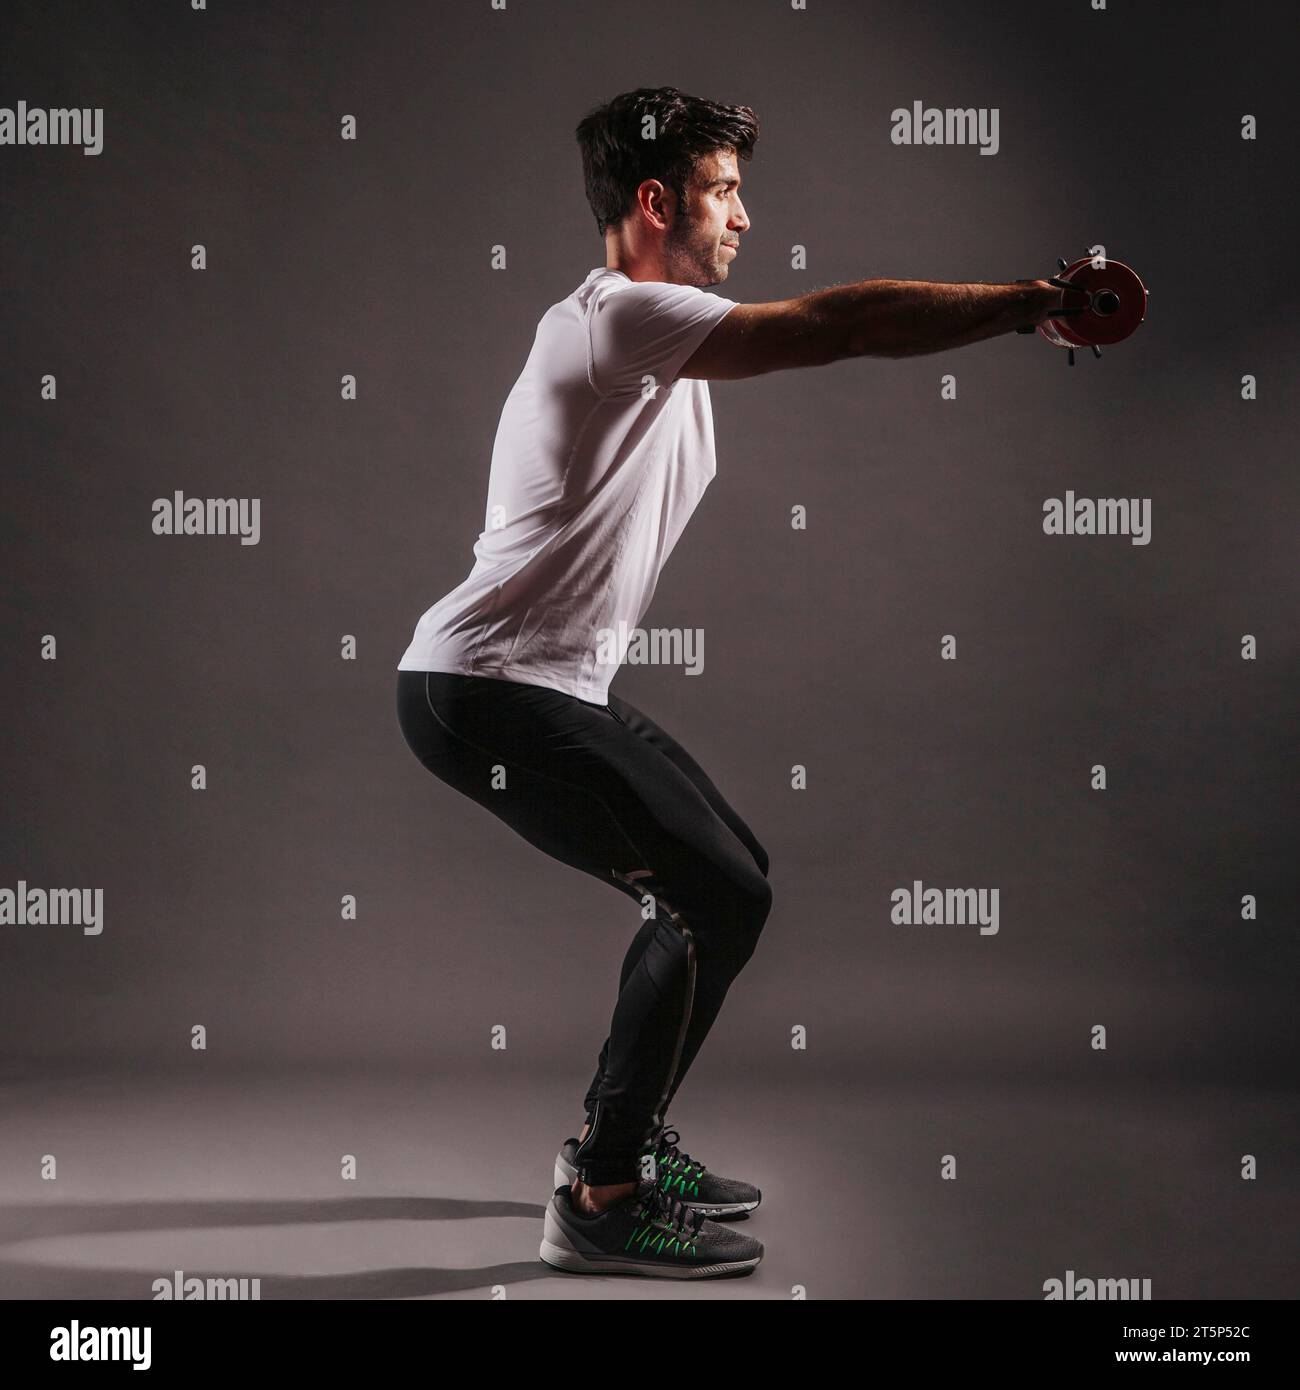 Man squatting with dumbbells Stock Photo